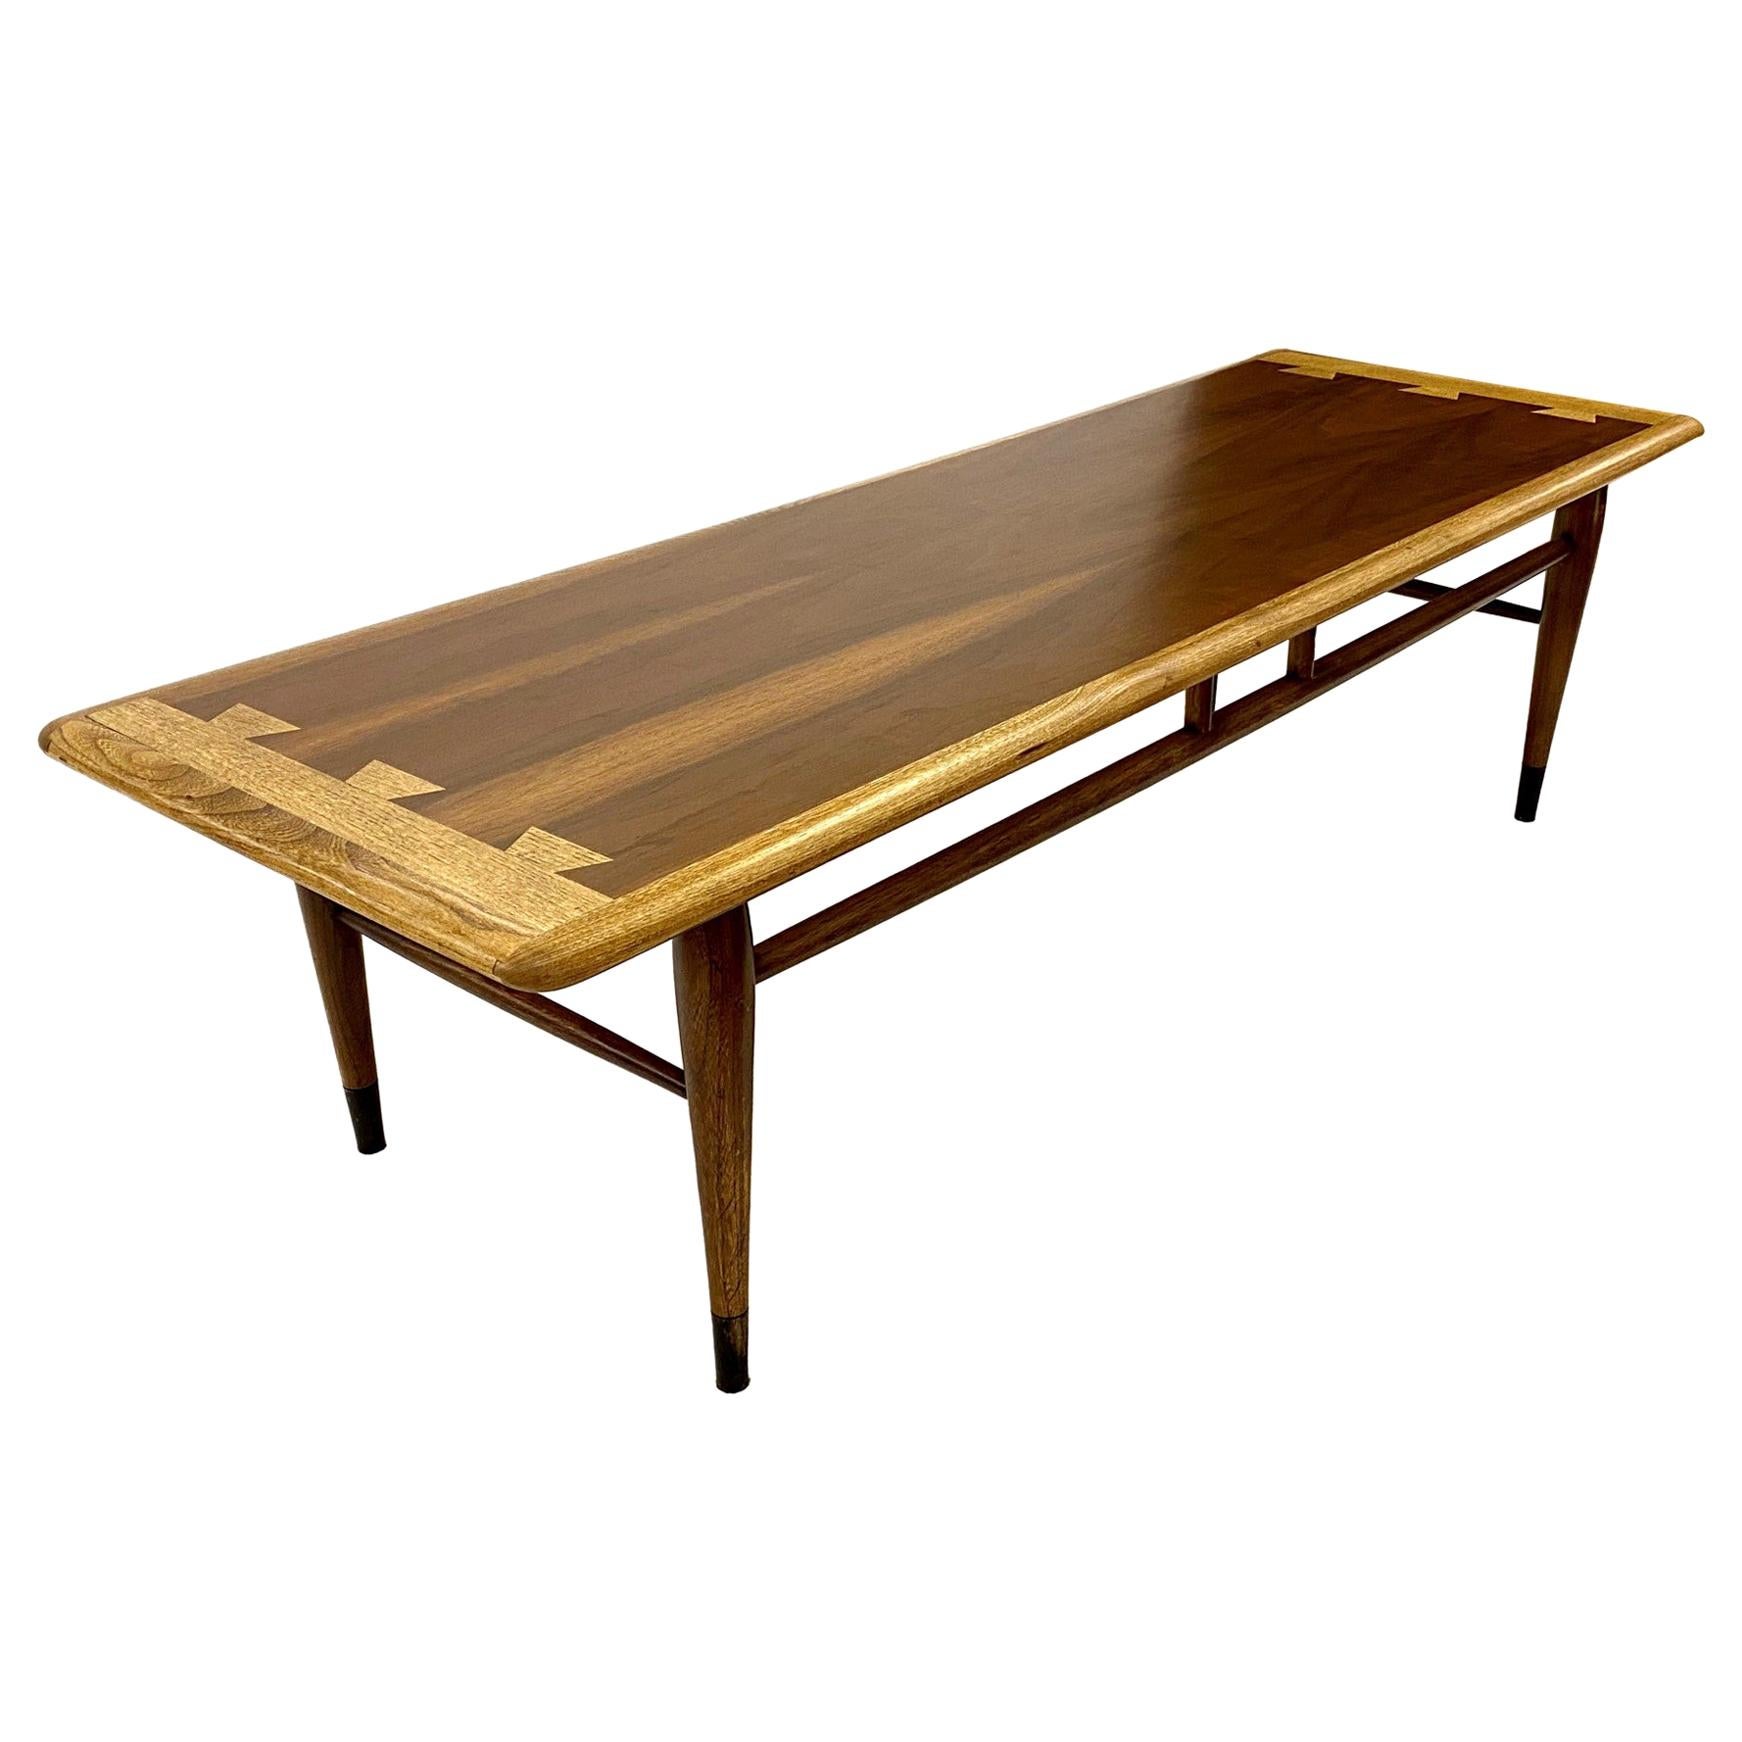 1960s Lane Acclaim Series Coffee Table with Hickory and Walnut Dovetail Details